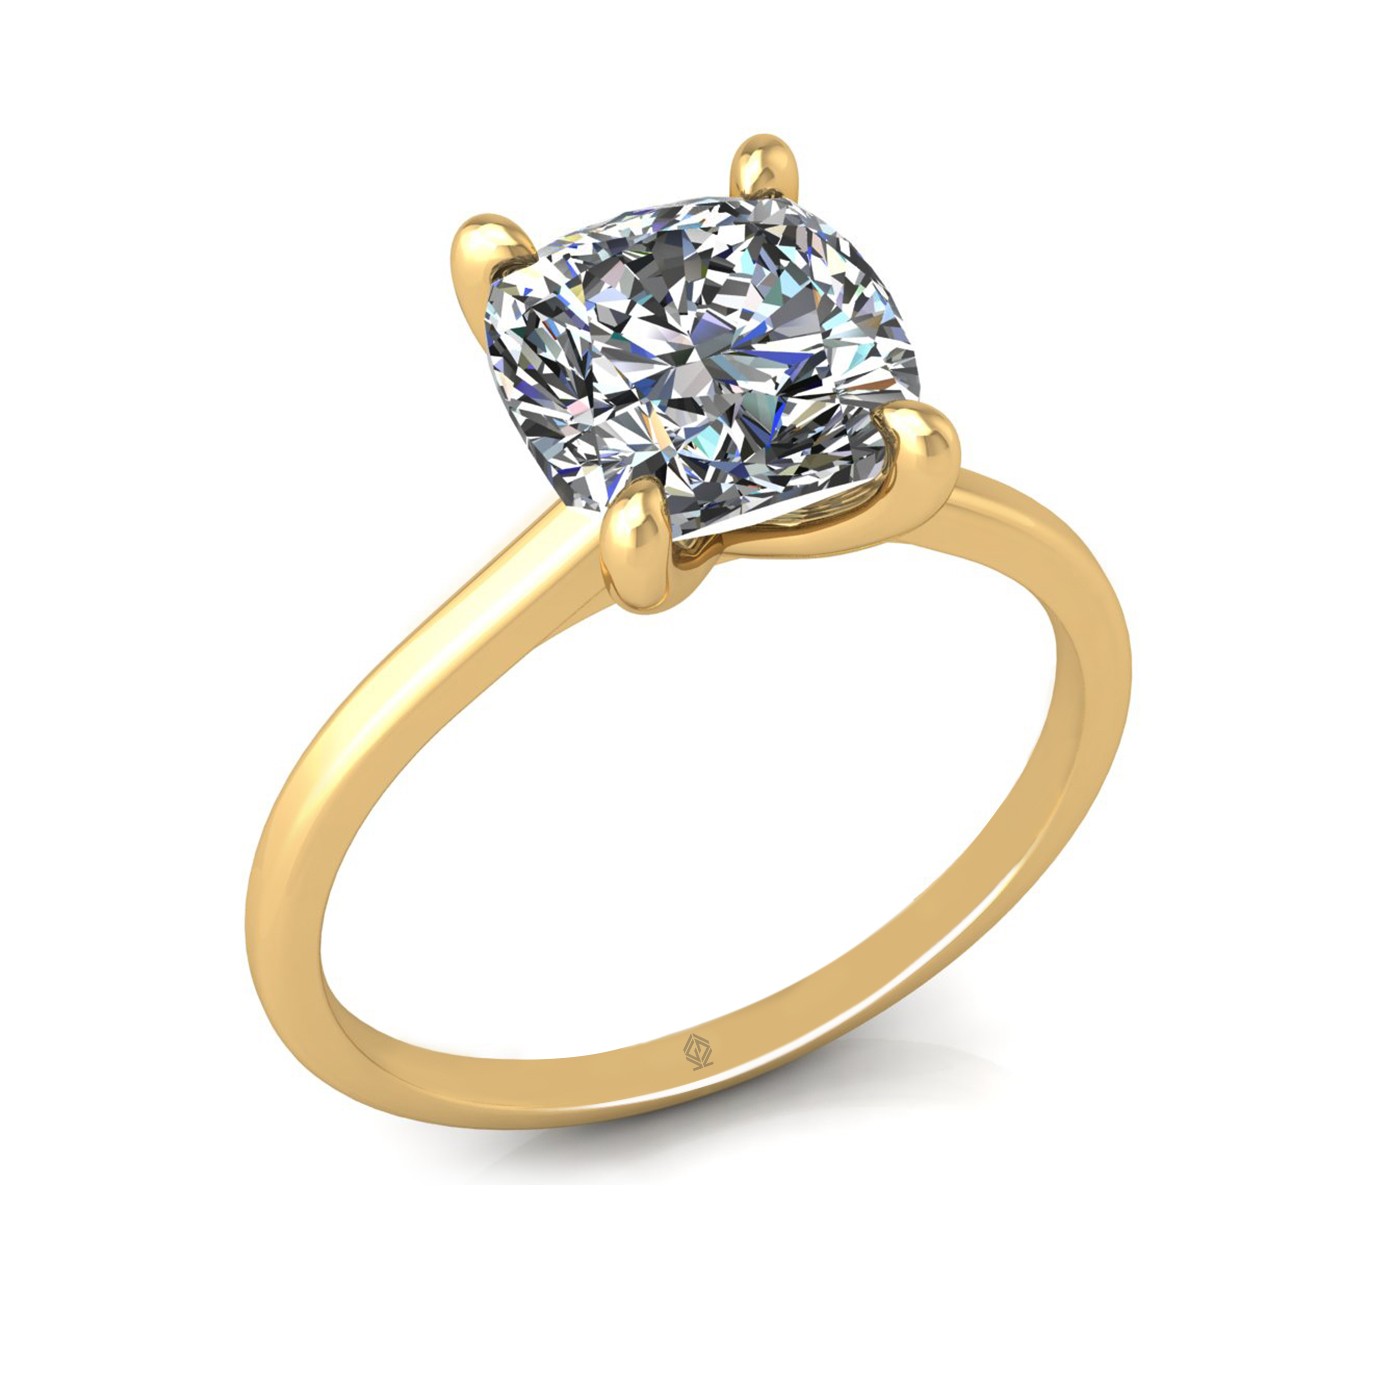 18k yellow gold 2.5ct 4 prongs solitaire cushion cut diamond engagement ring with whisper thin band